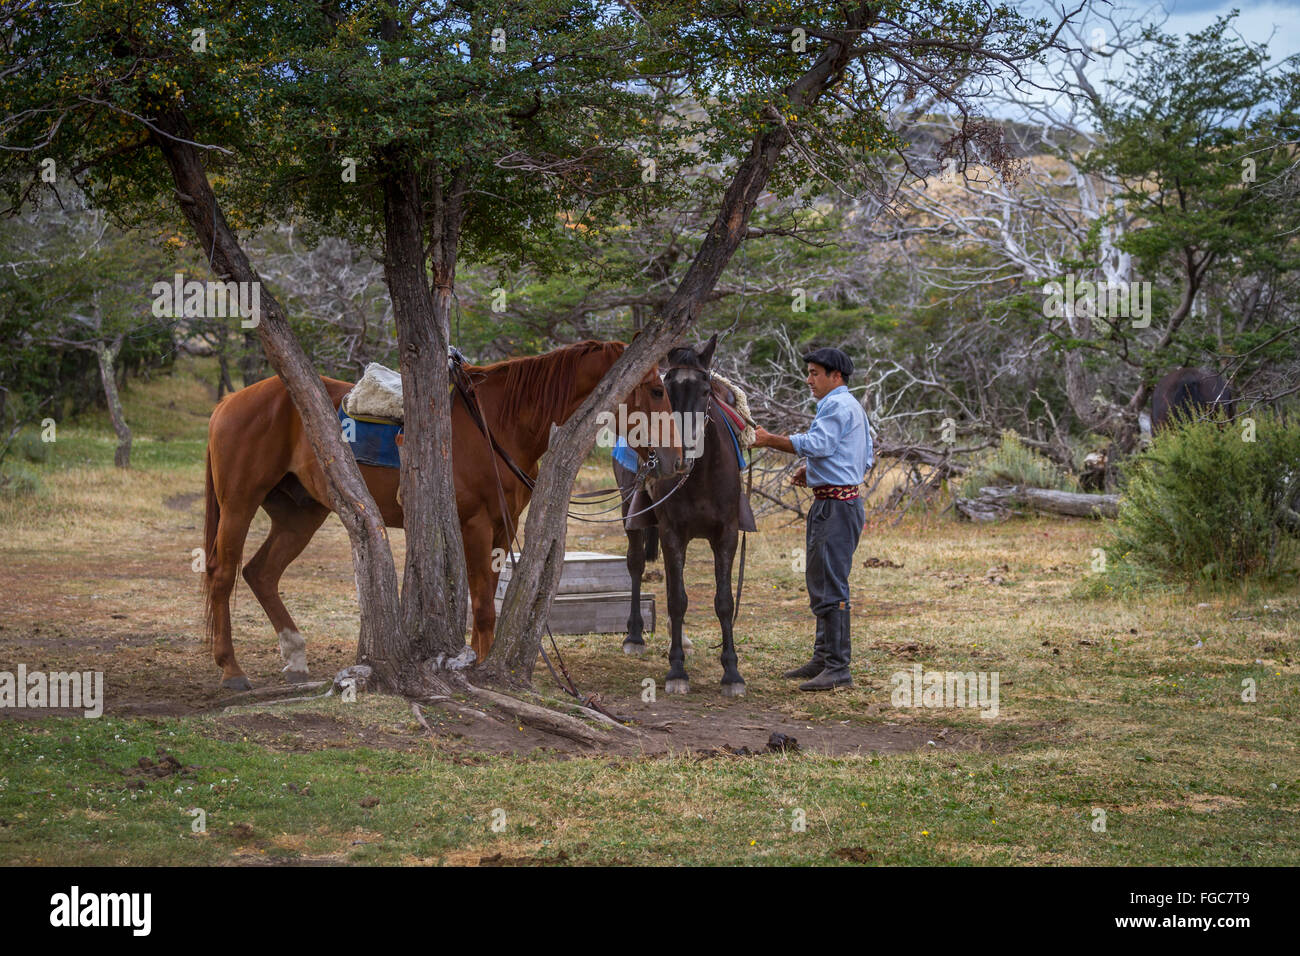 Gaucho person tending to horses, Torres del Paine National Park, Chile, Patagonia, South America Stock Photo